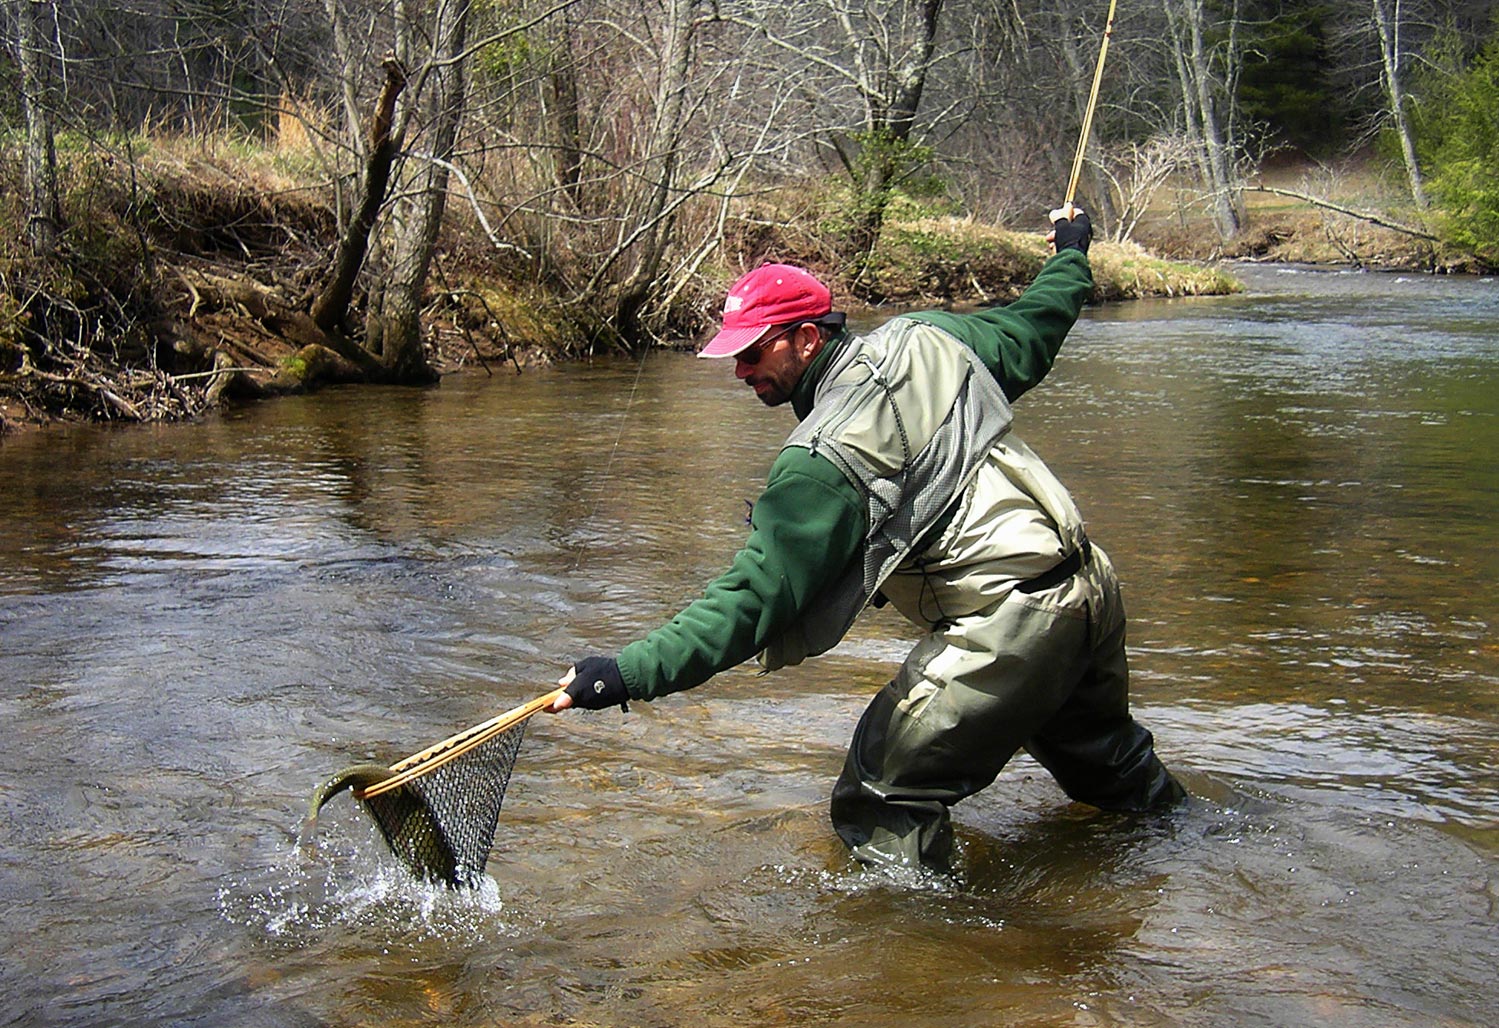 9 Tips for Netting Big Fish on Your Own - Fly Fishing, Gink and Gasoline, How to Fly Fish, Trout Fishing, Fly Tying